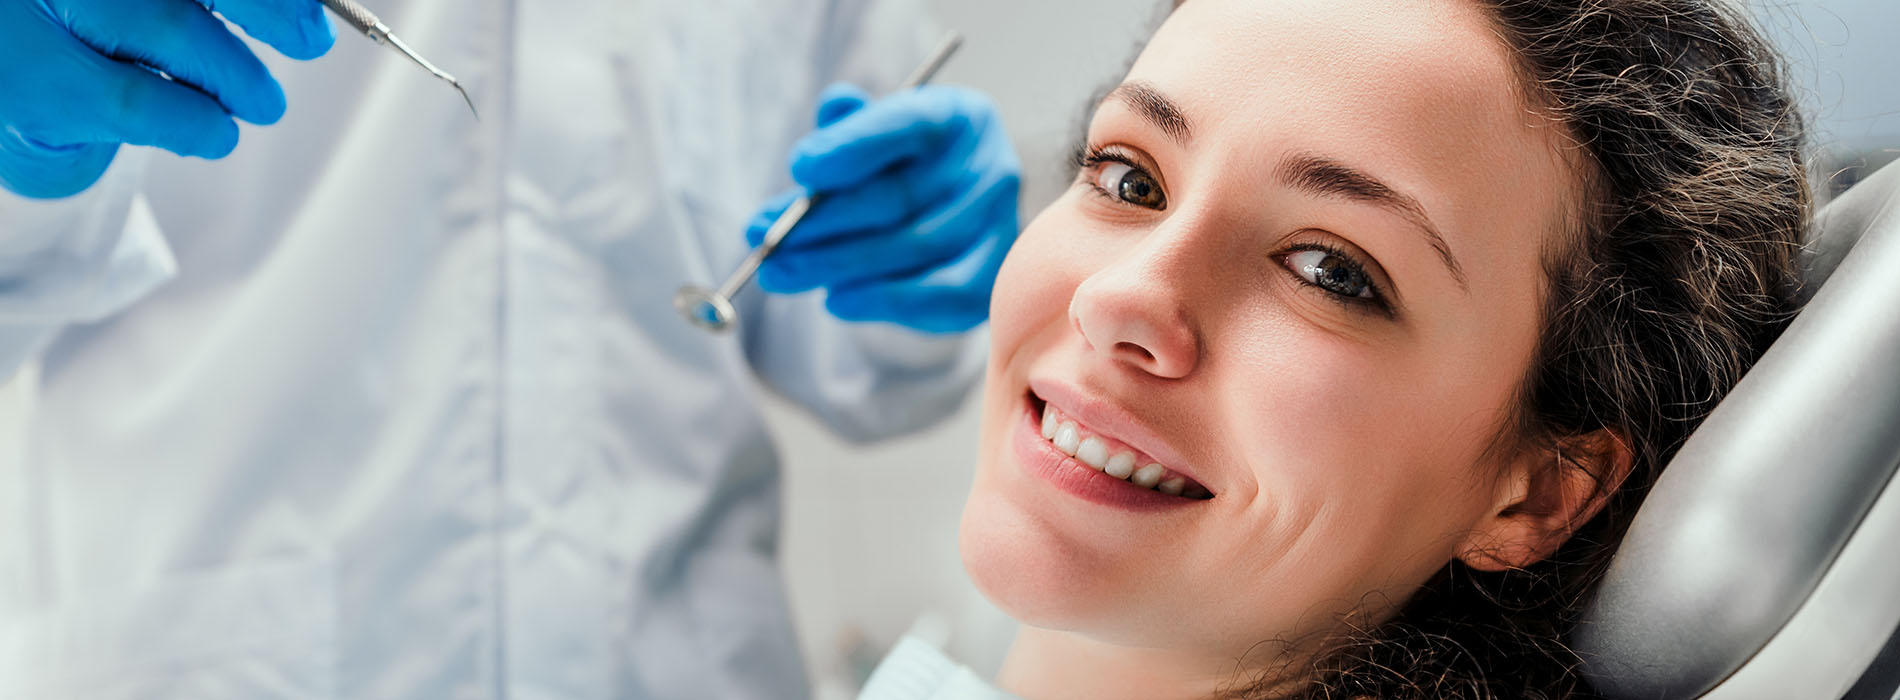 New Smile Dentistry | Oral Exams, Night Guards and Implant Dentistry